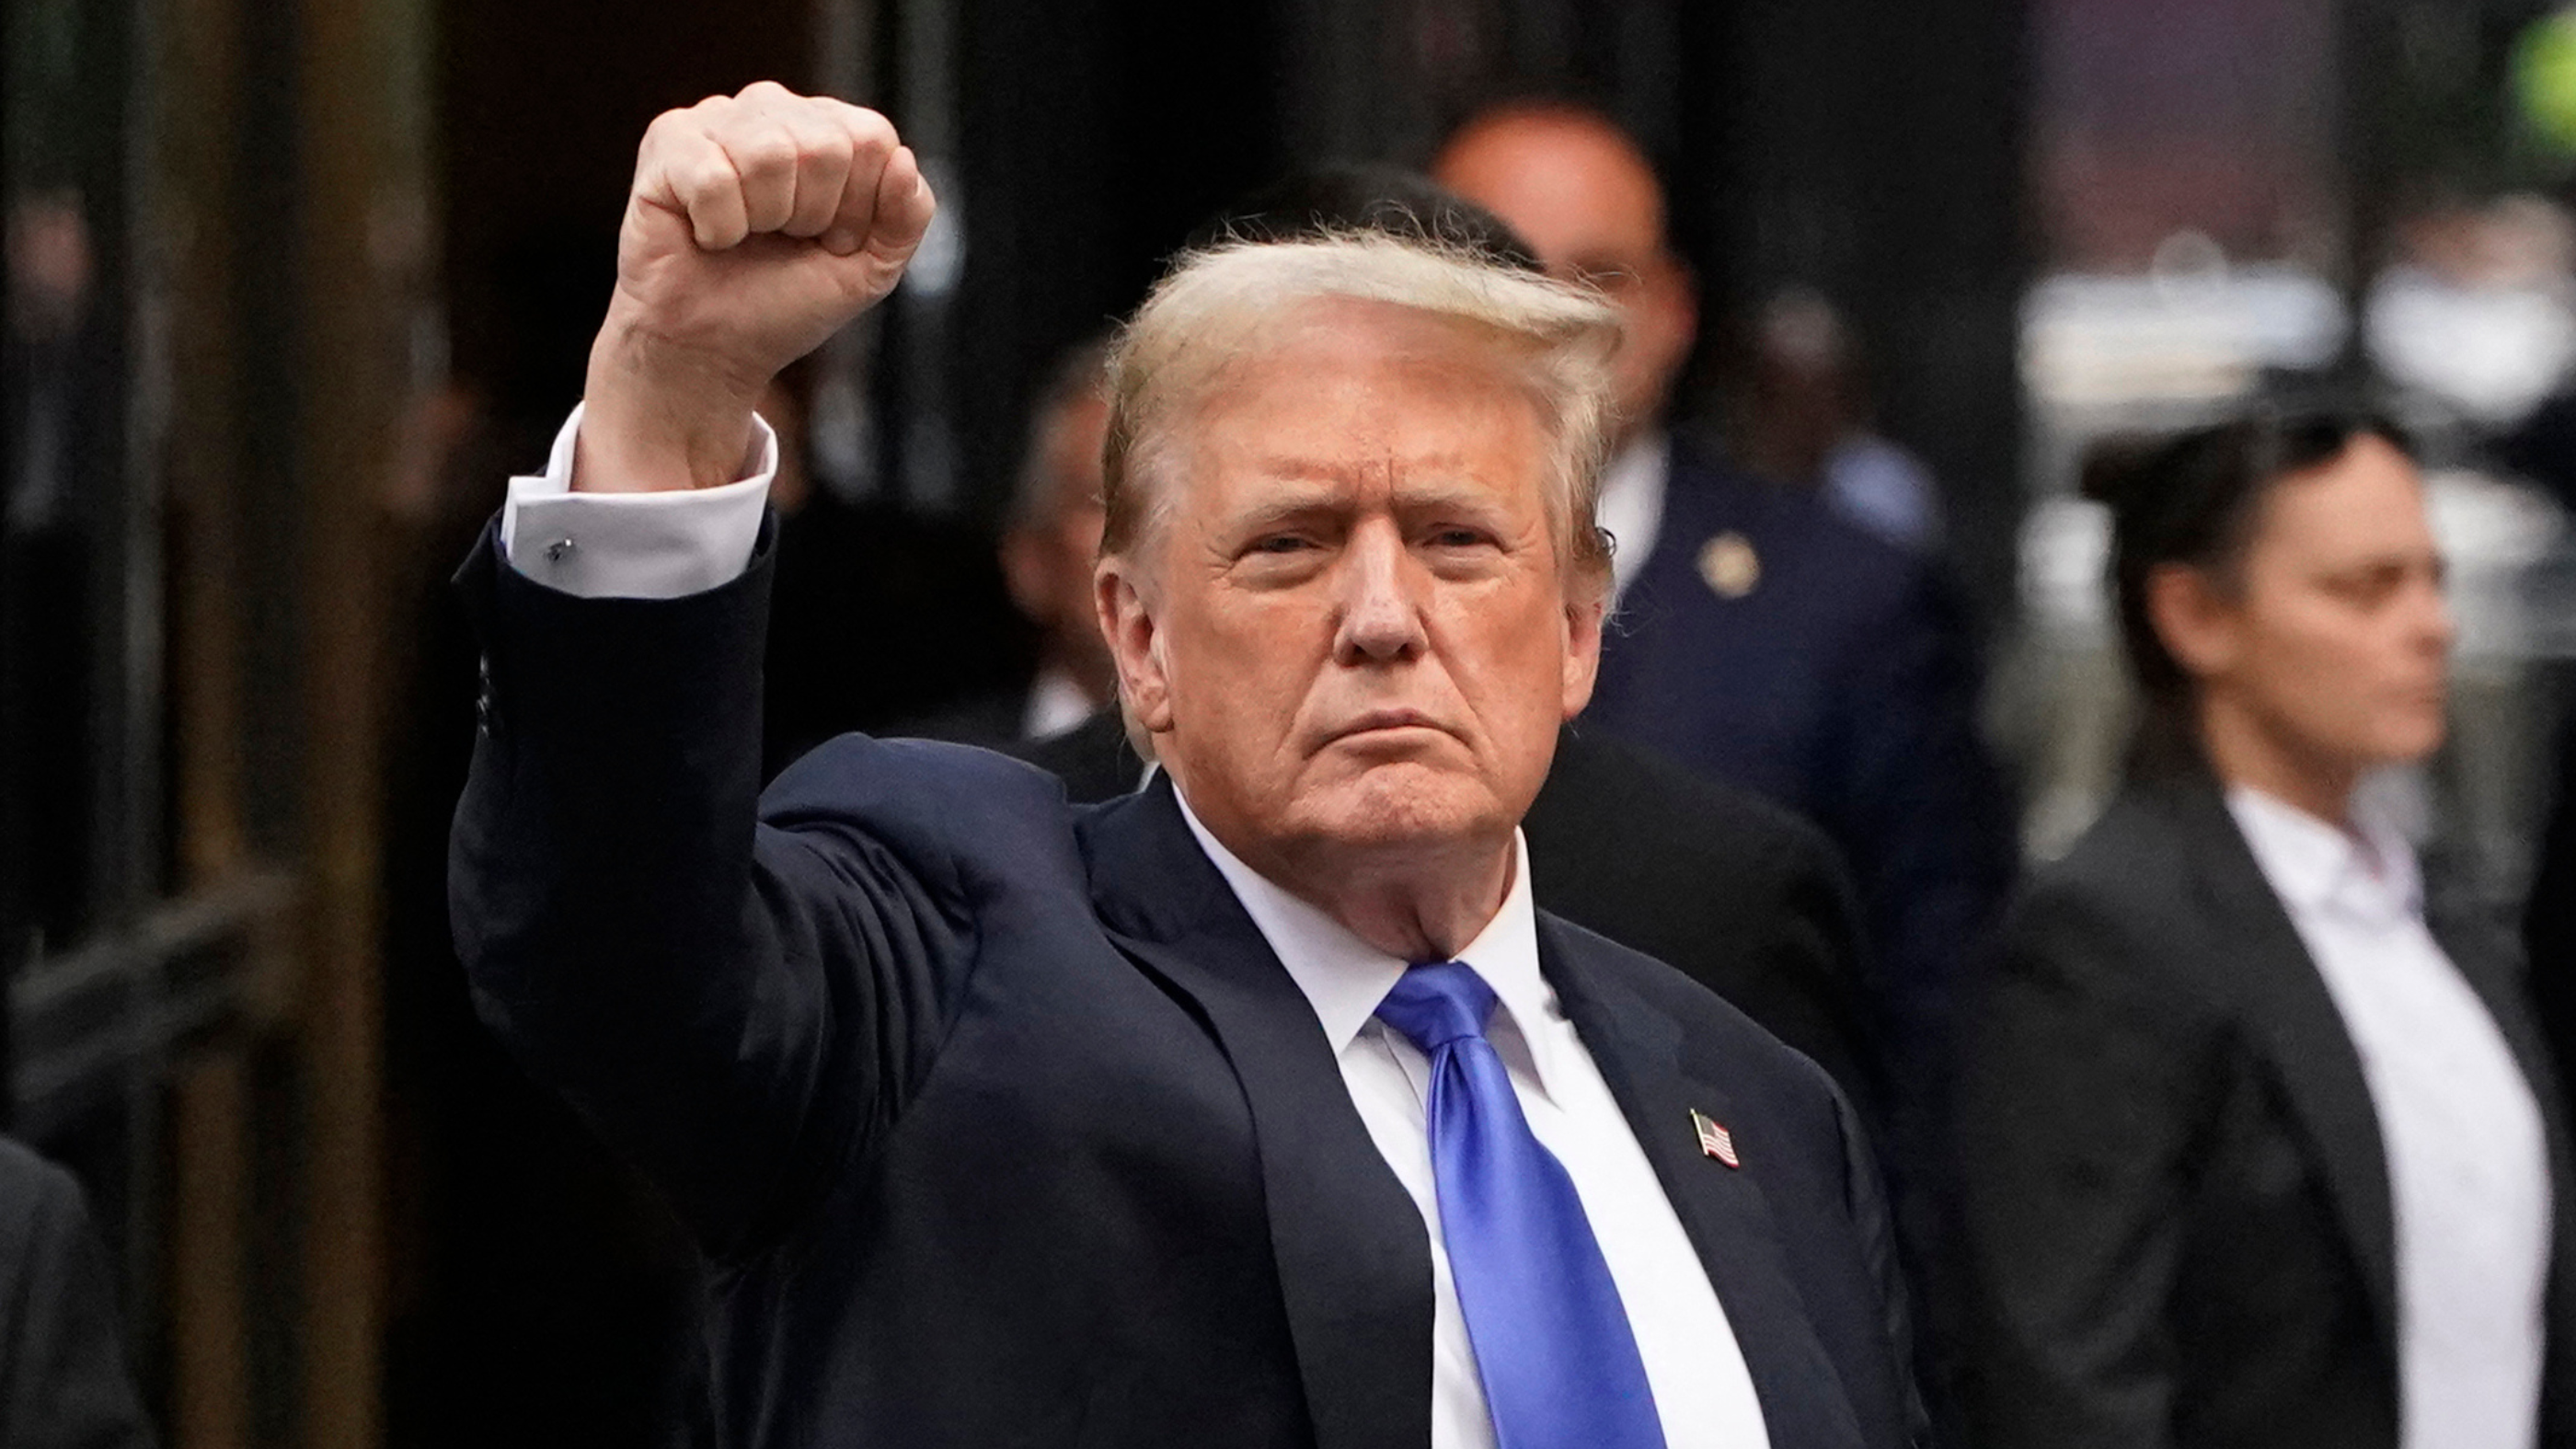 Trump 'defiant' as conviction fires up campaign, the Mavericks advance to the NBA Finals and the IRS expands Direct File